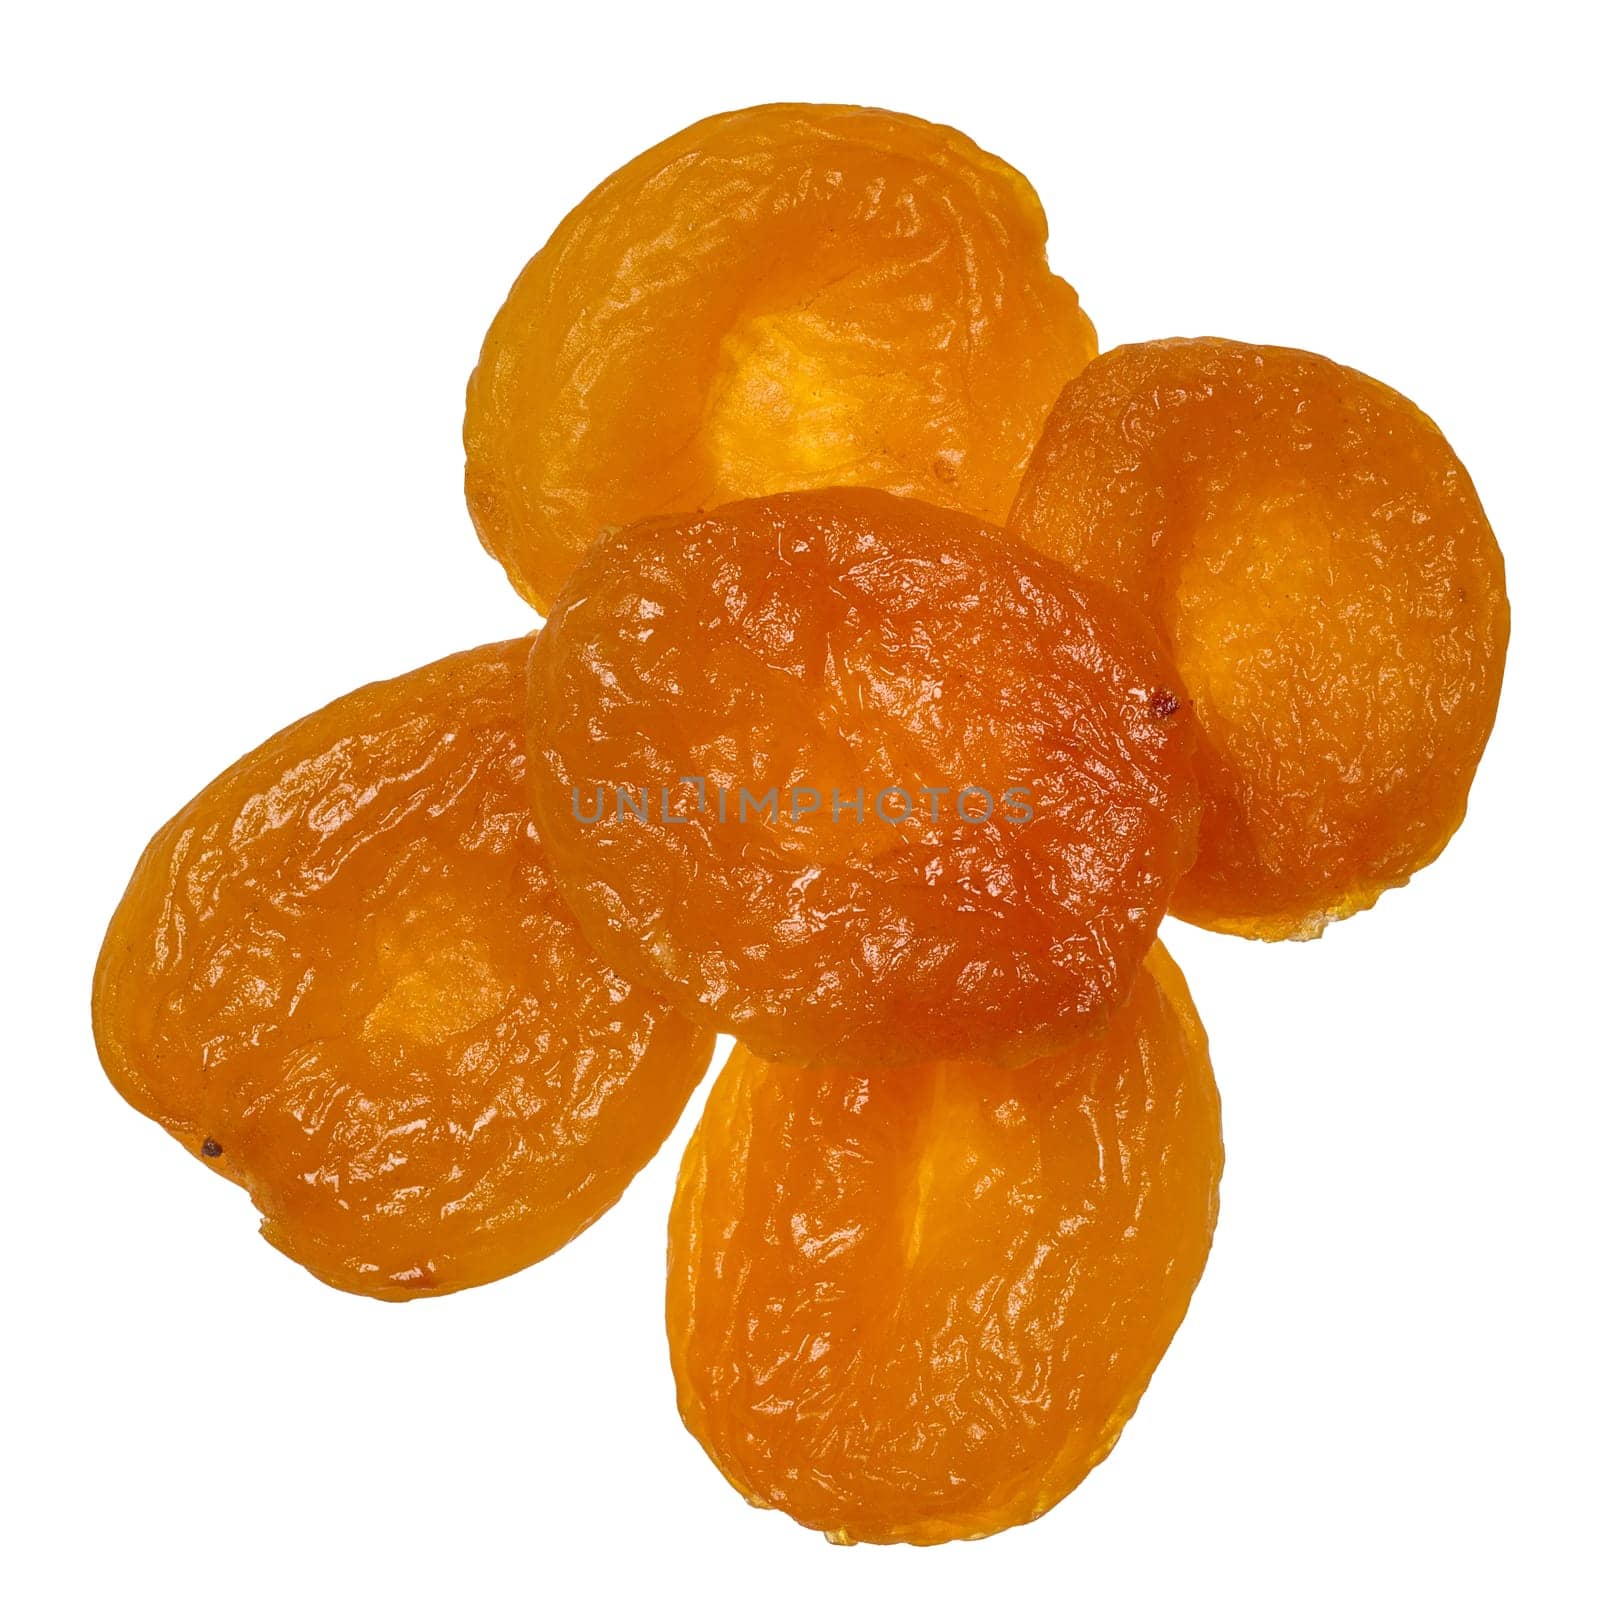 Dried apricot on isolated background, top view